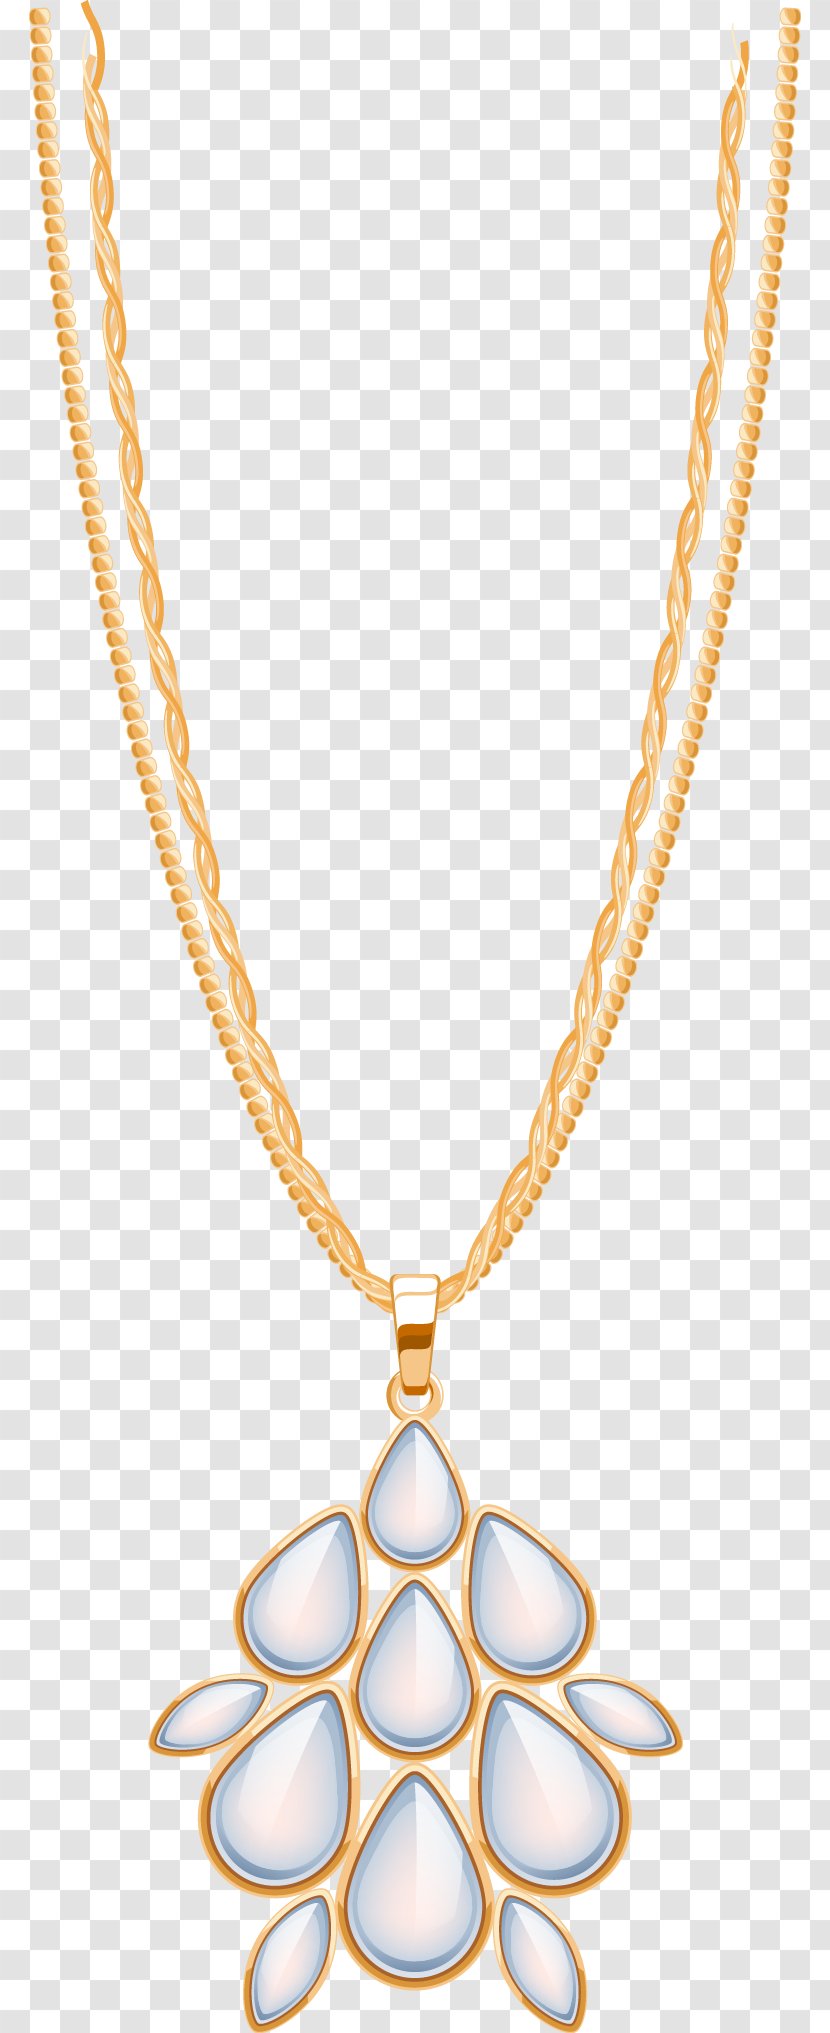 Necklace Pendant Chain Diamond Jewellery - Brooch - Dazzling Jewelry Transparent PNG